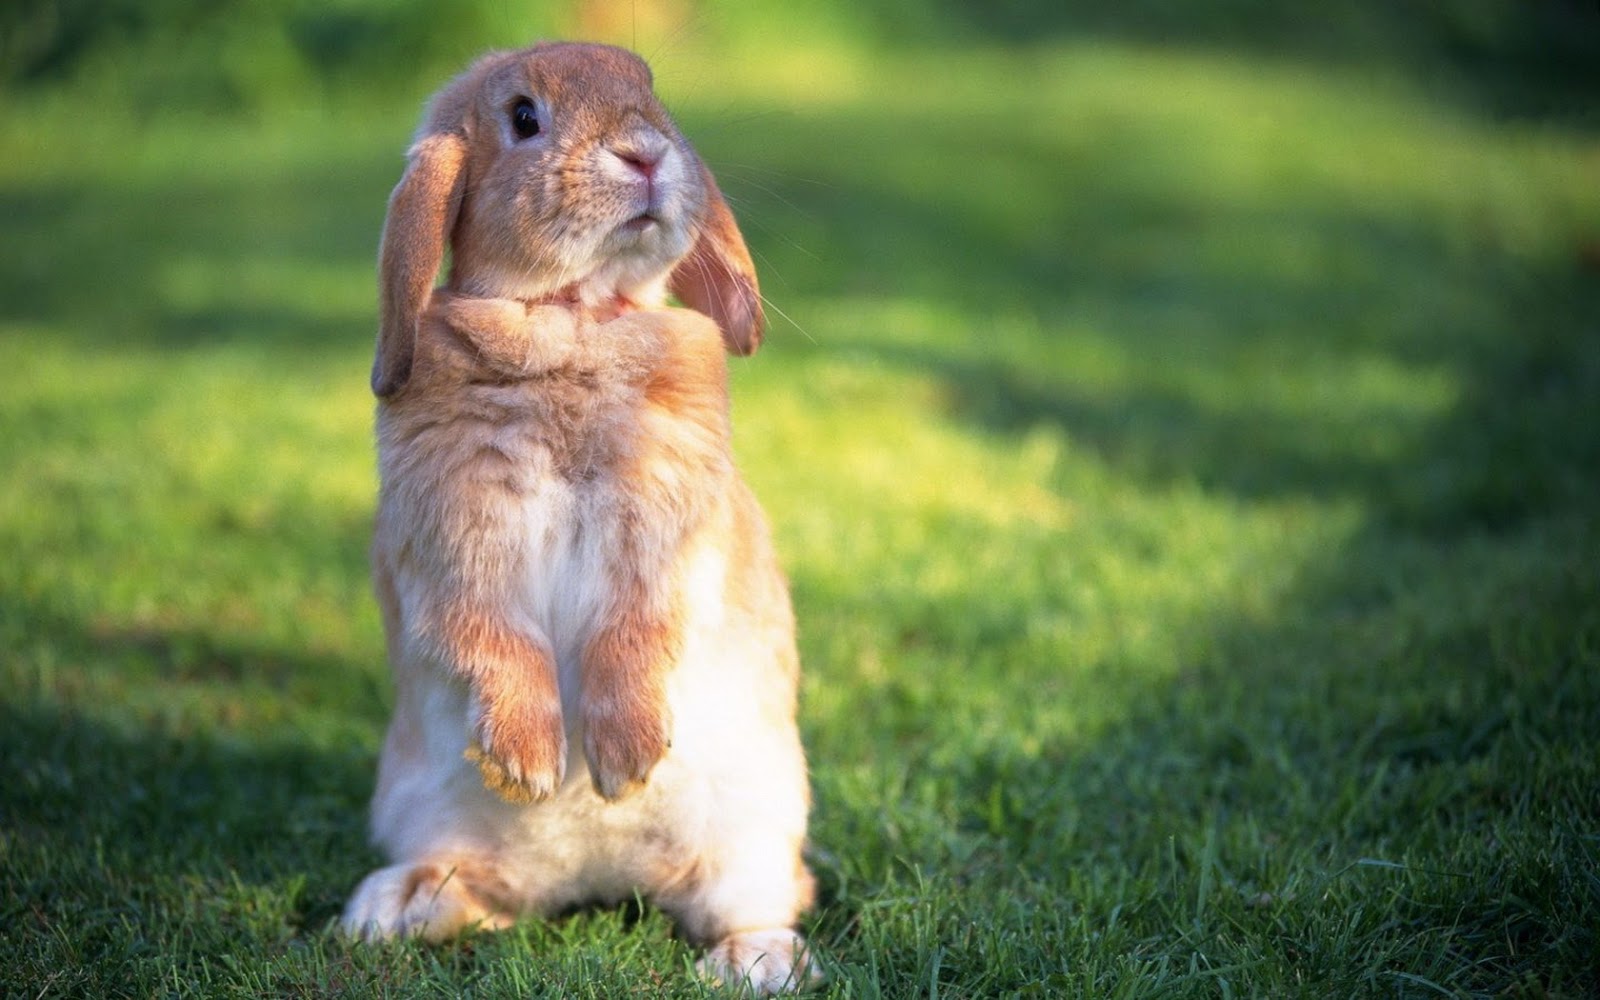 All Wallpapers Cute Rabbit hd Wallpapers 2013